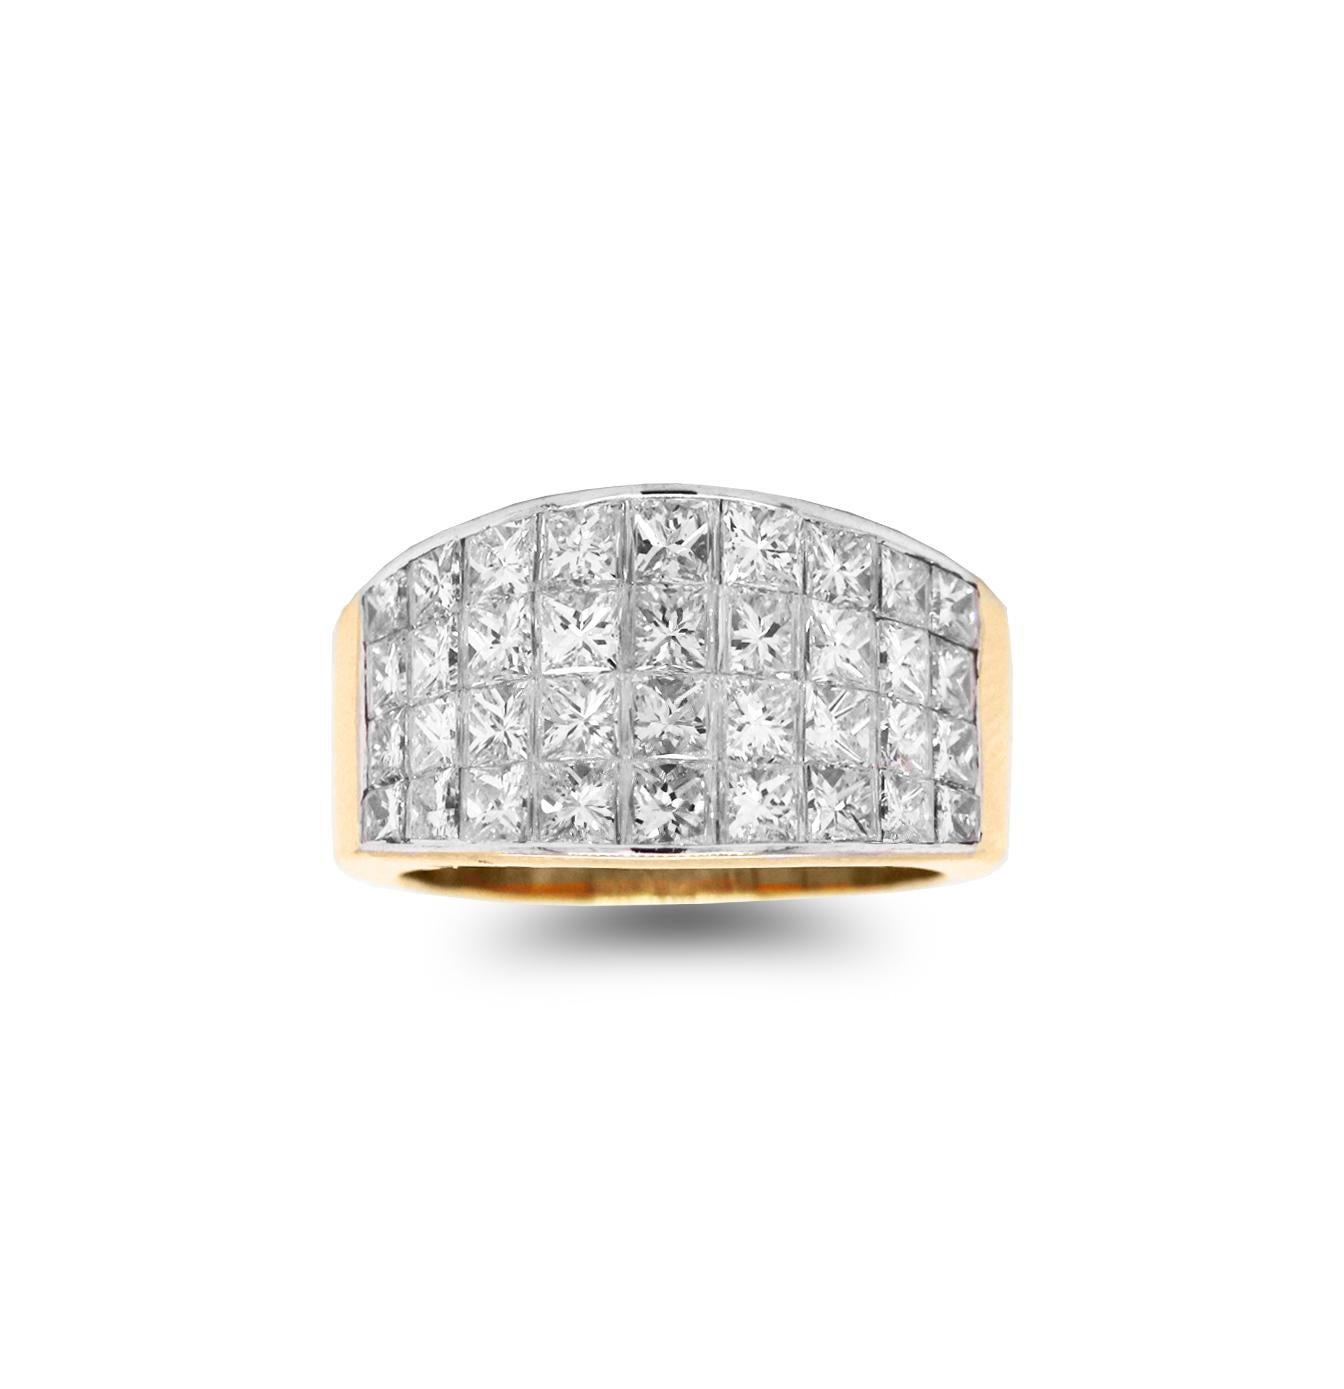 18K Yellow and White Gold Ring with Invisible-Set Princess cut Diamonds

3.80 carat G-F Color, VS Clarity Princess cut diamonds total weight. Diamonds are invisible set.

Ring face is 0.45 inch width
0.25 inch band width

Ring is a size 7. Sizable
